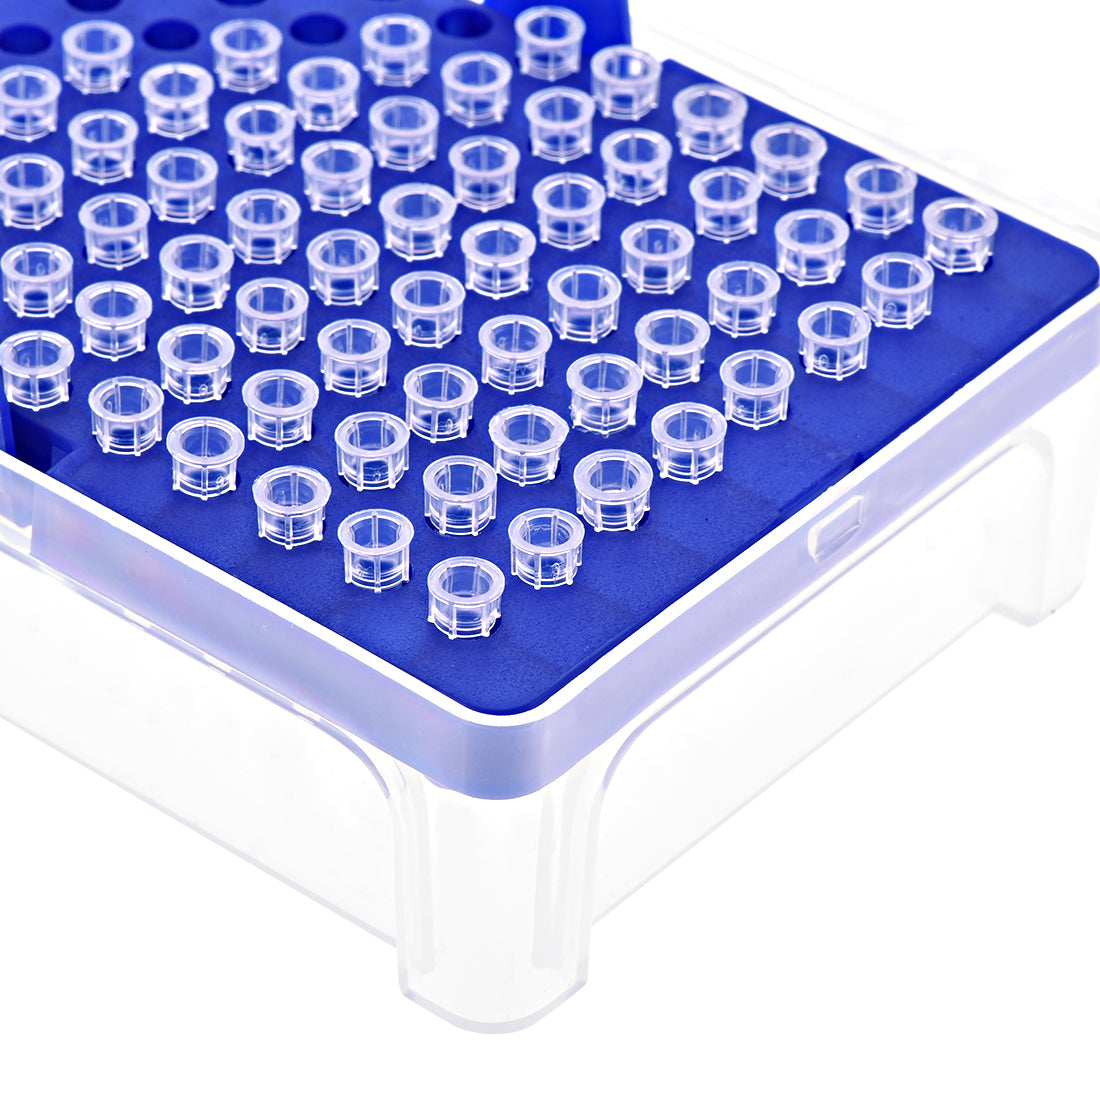 uxcell Uxcell Pipette Tips Box 96-Well Polypropylene Tip Holder Container for 10ul Pipettor 4.5mm Hole Diameter Blue 2Pcs